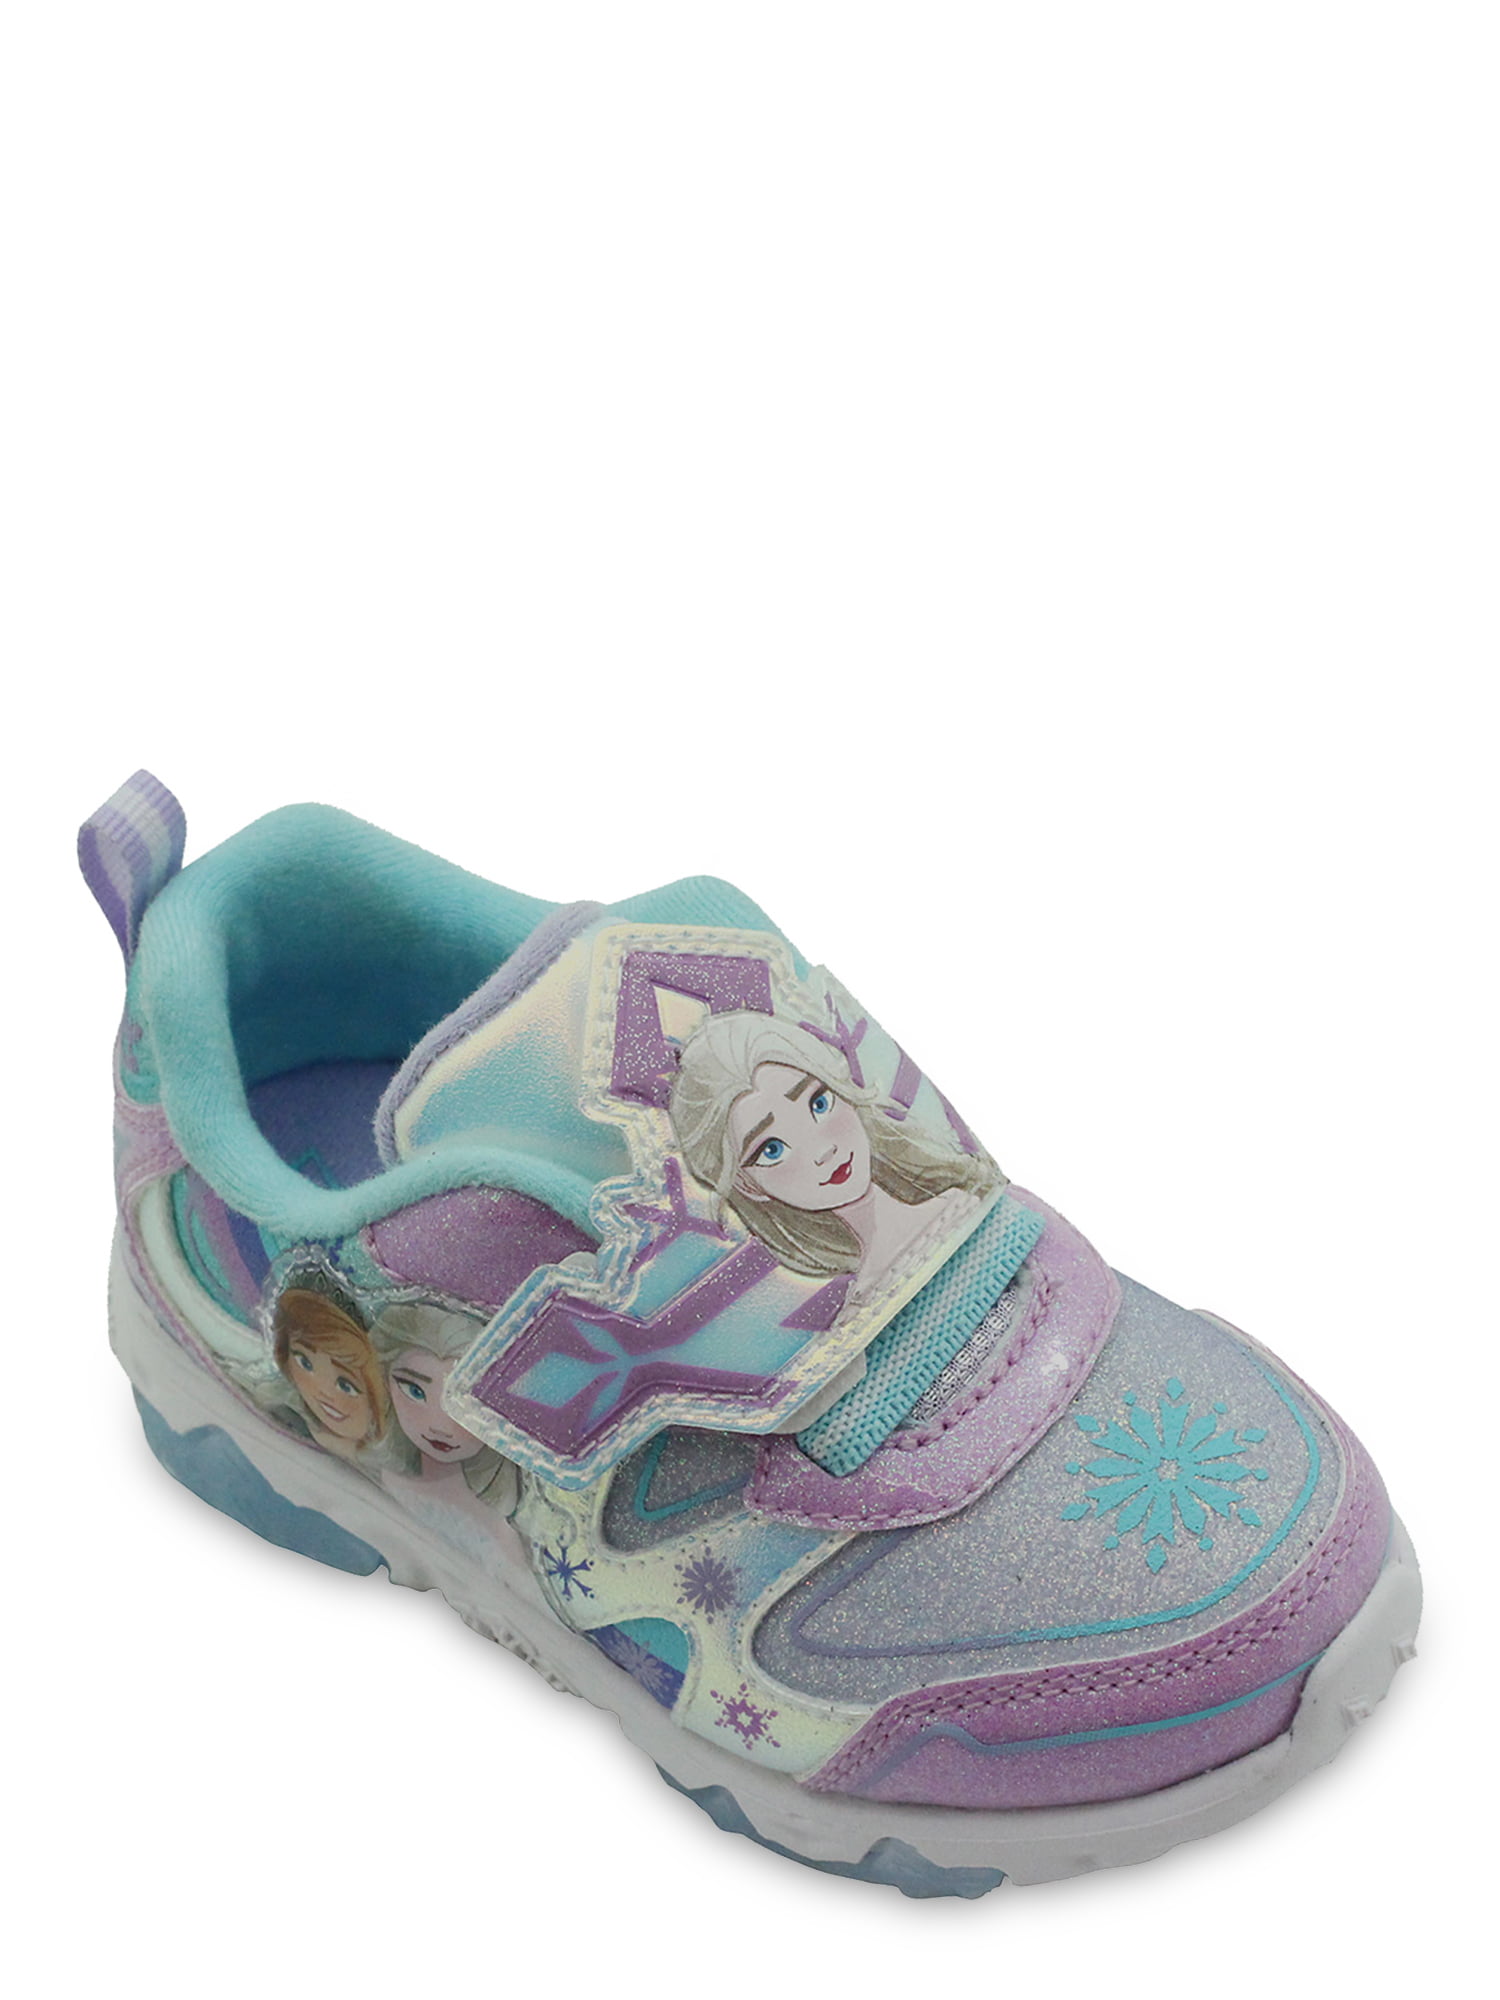 Disney Frozen Elsa Anna High-Top Shoes sneakers Toddler/Youth Blue/Pink